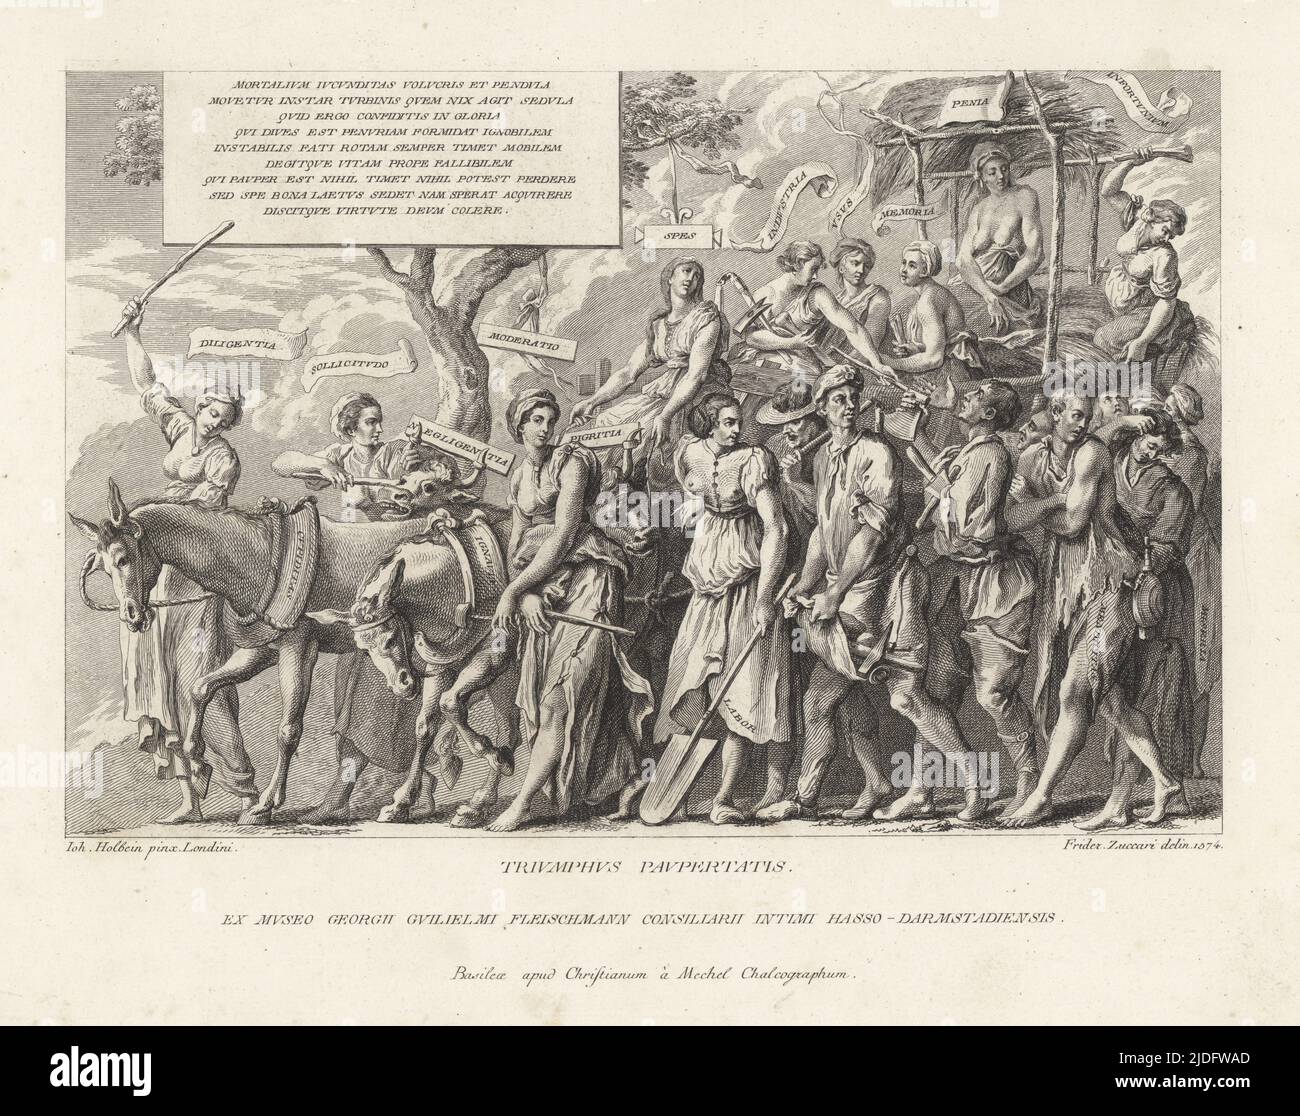 Triumph of Poverty. Female allegorical figures of Industry, Memory, Penia (poverty), Hope ride a hay wagon drawn by bulls and mules, handing out weapons and tools to Labor, Misery, Beggary, etc. Triumphus Paupertatis. Copperplate engraving by Christian Mechel after a sketch by Federico Zuccari after Hans Holbein's painting in Christian von Mechel's Oeuvre de Jean Holbein, Chez Guillaume Haas, Basel, 1790. Stock Photo